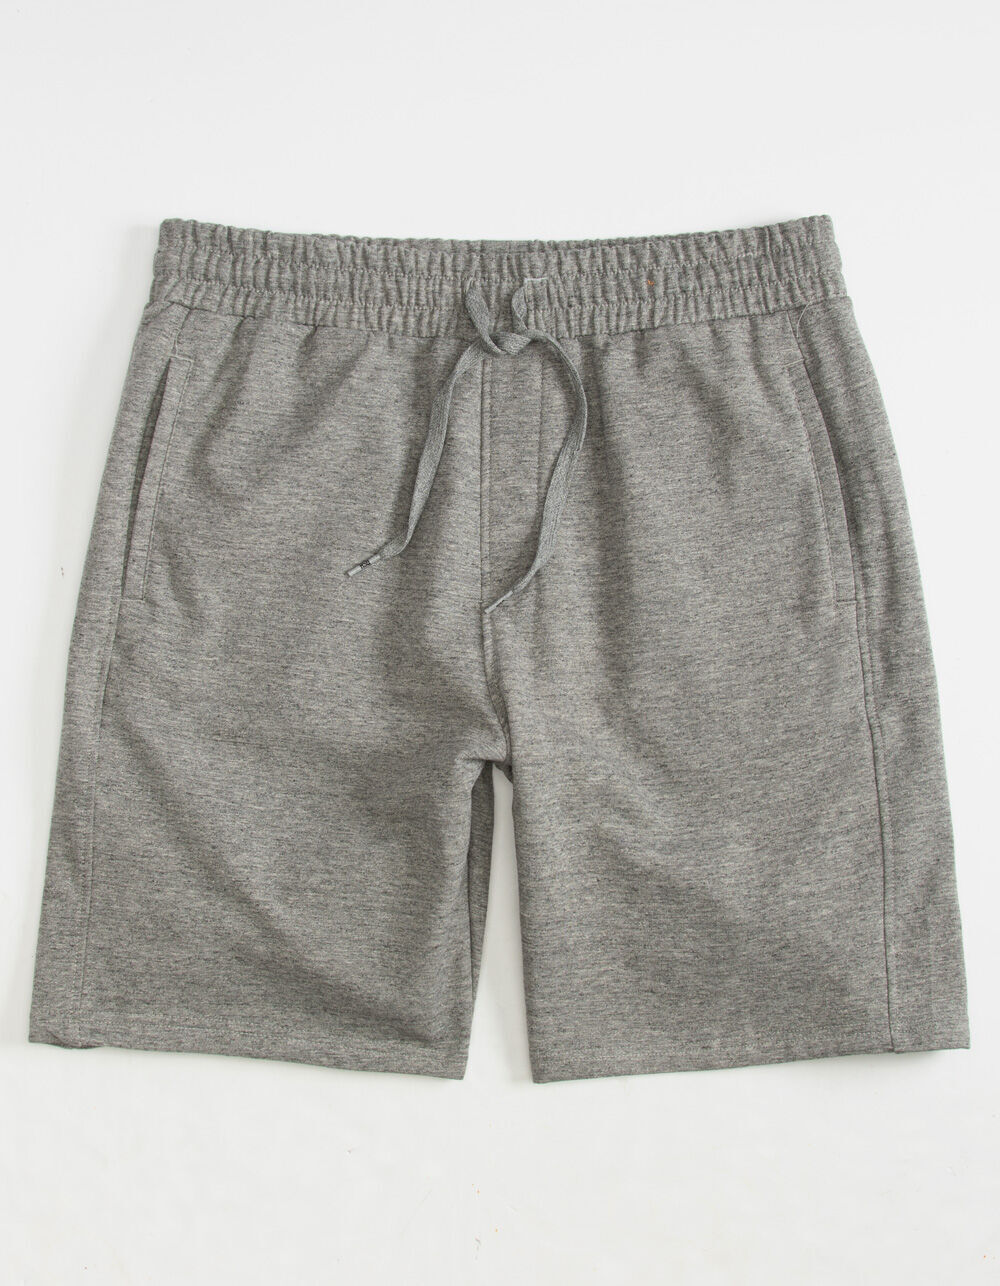 Heather Tillys Shorts Gray | HEATHER Mens RSQ Sweat - GRAY